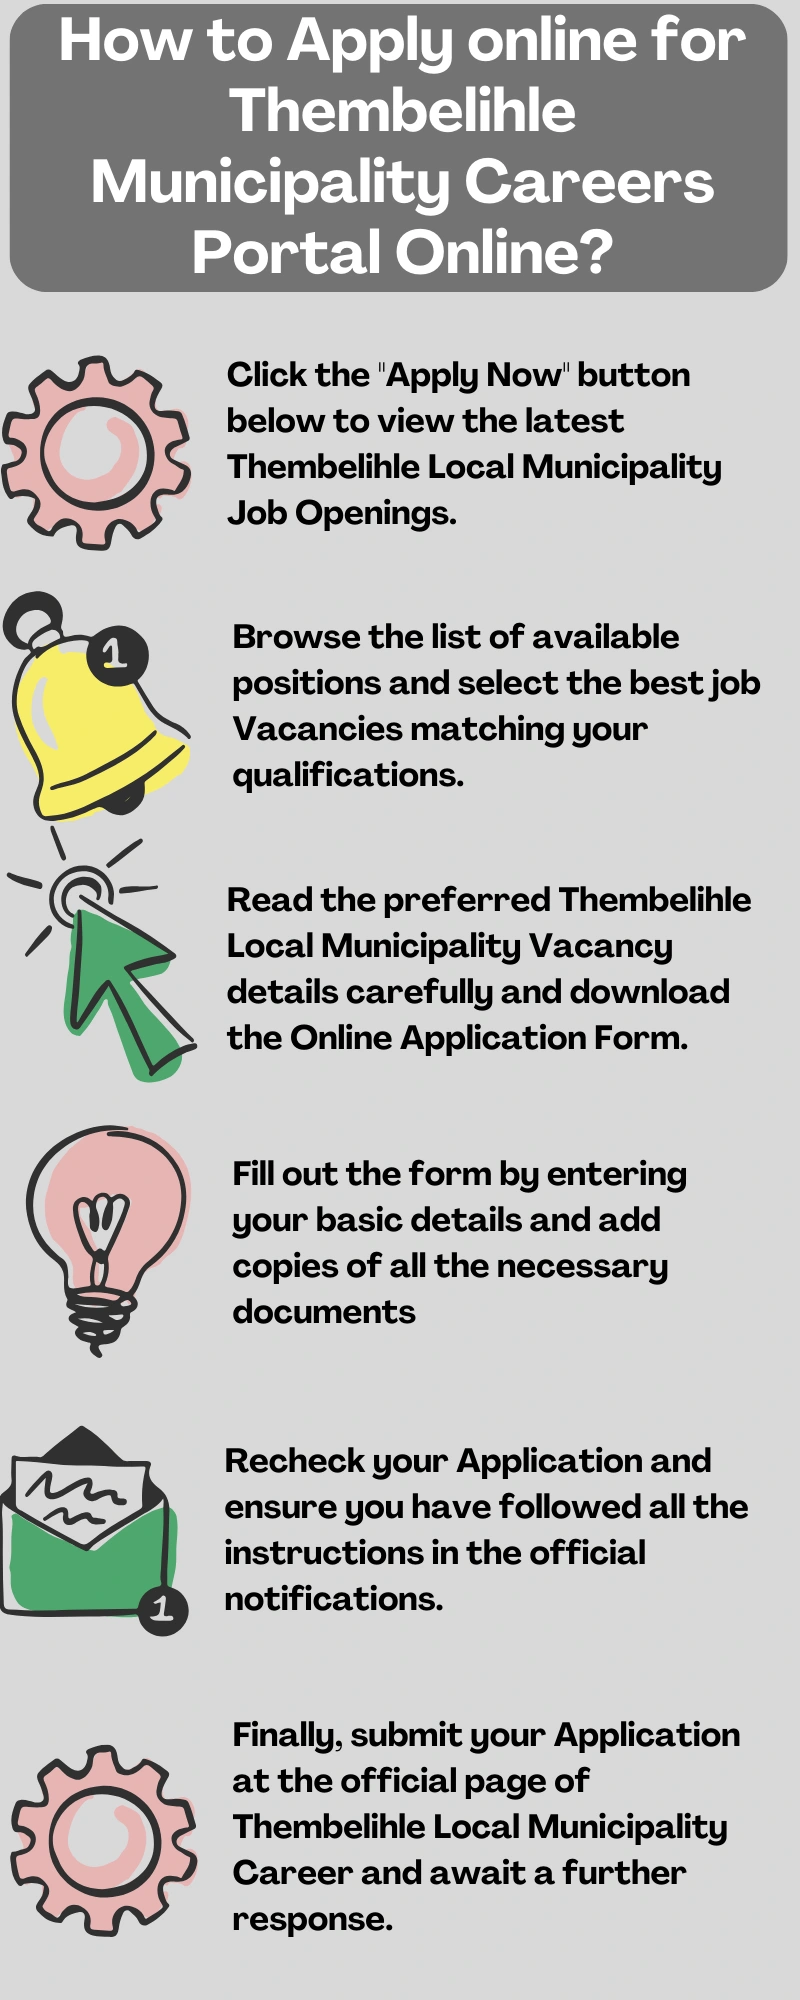 How to Apply online for Thembelihle Municipality Careers Portal Online?